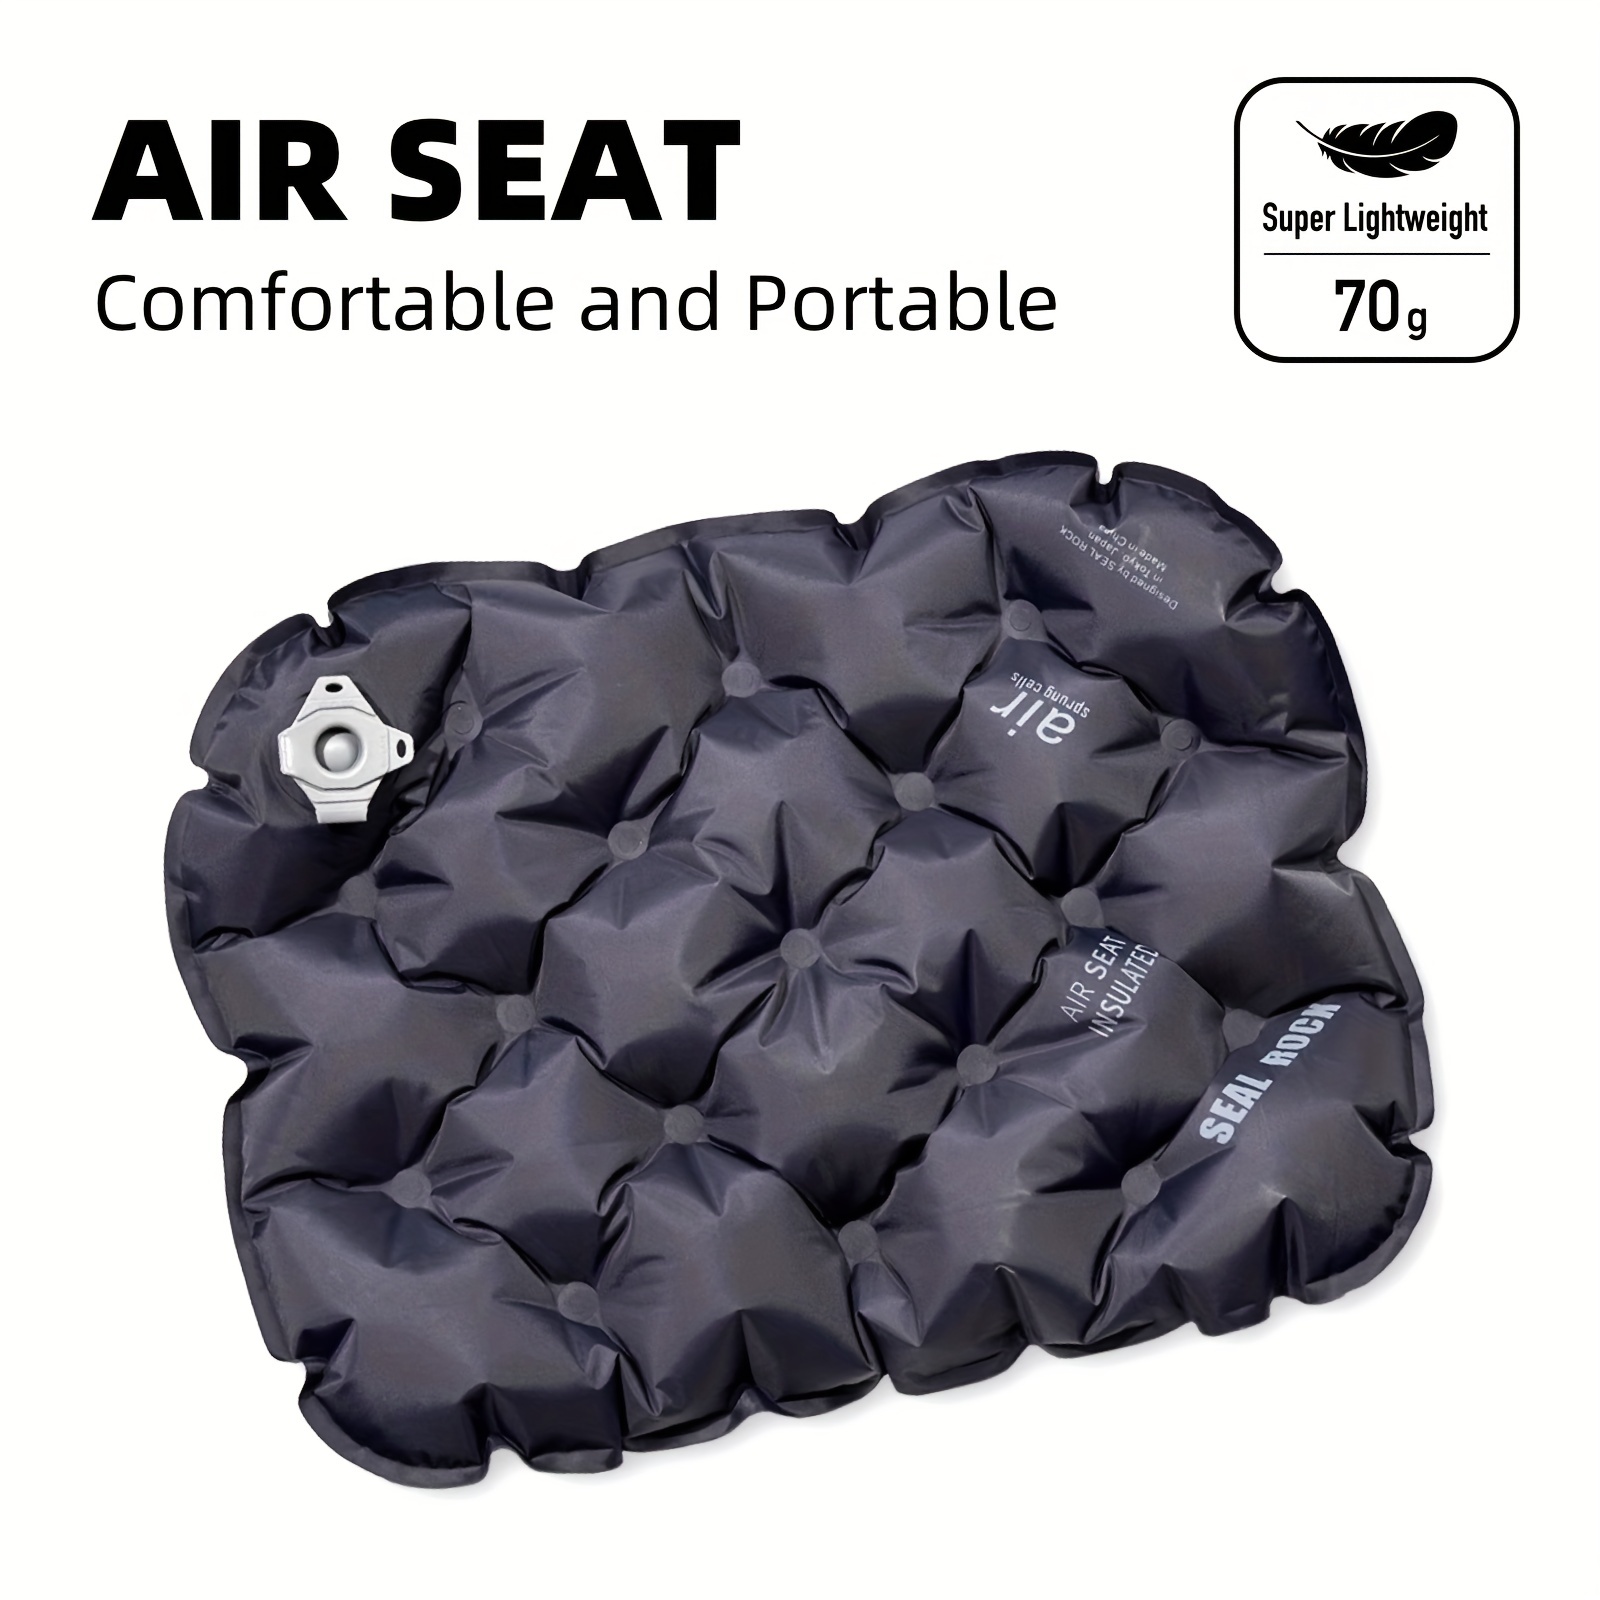 How to Patch an Air Seat Cushion 